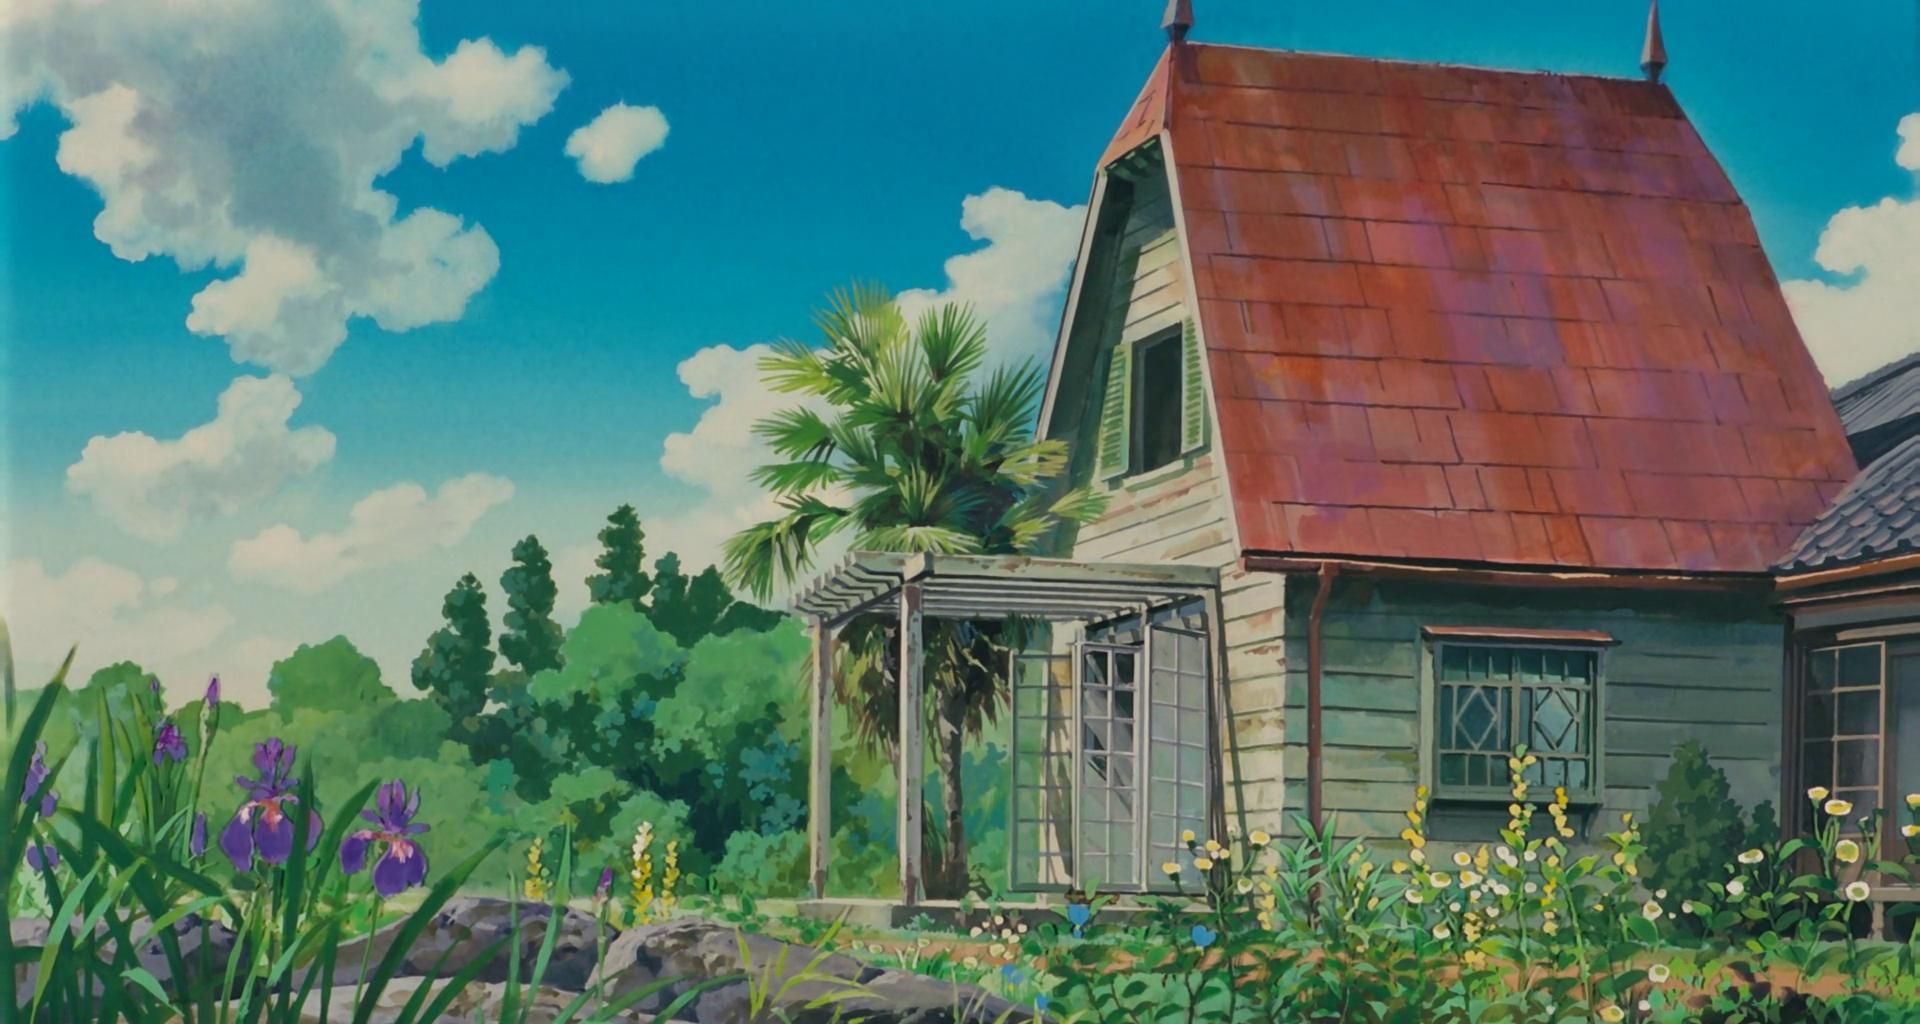 Studio Ghibli anime wallpaper free download zoom background video  conference chat call Japan animation Japanese movies films Nausicaa Laputa  Castle in the Sky Princess Mononoke Spirited Away Howls Moving Castle  Ponyo Arrietty